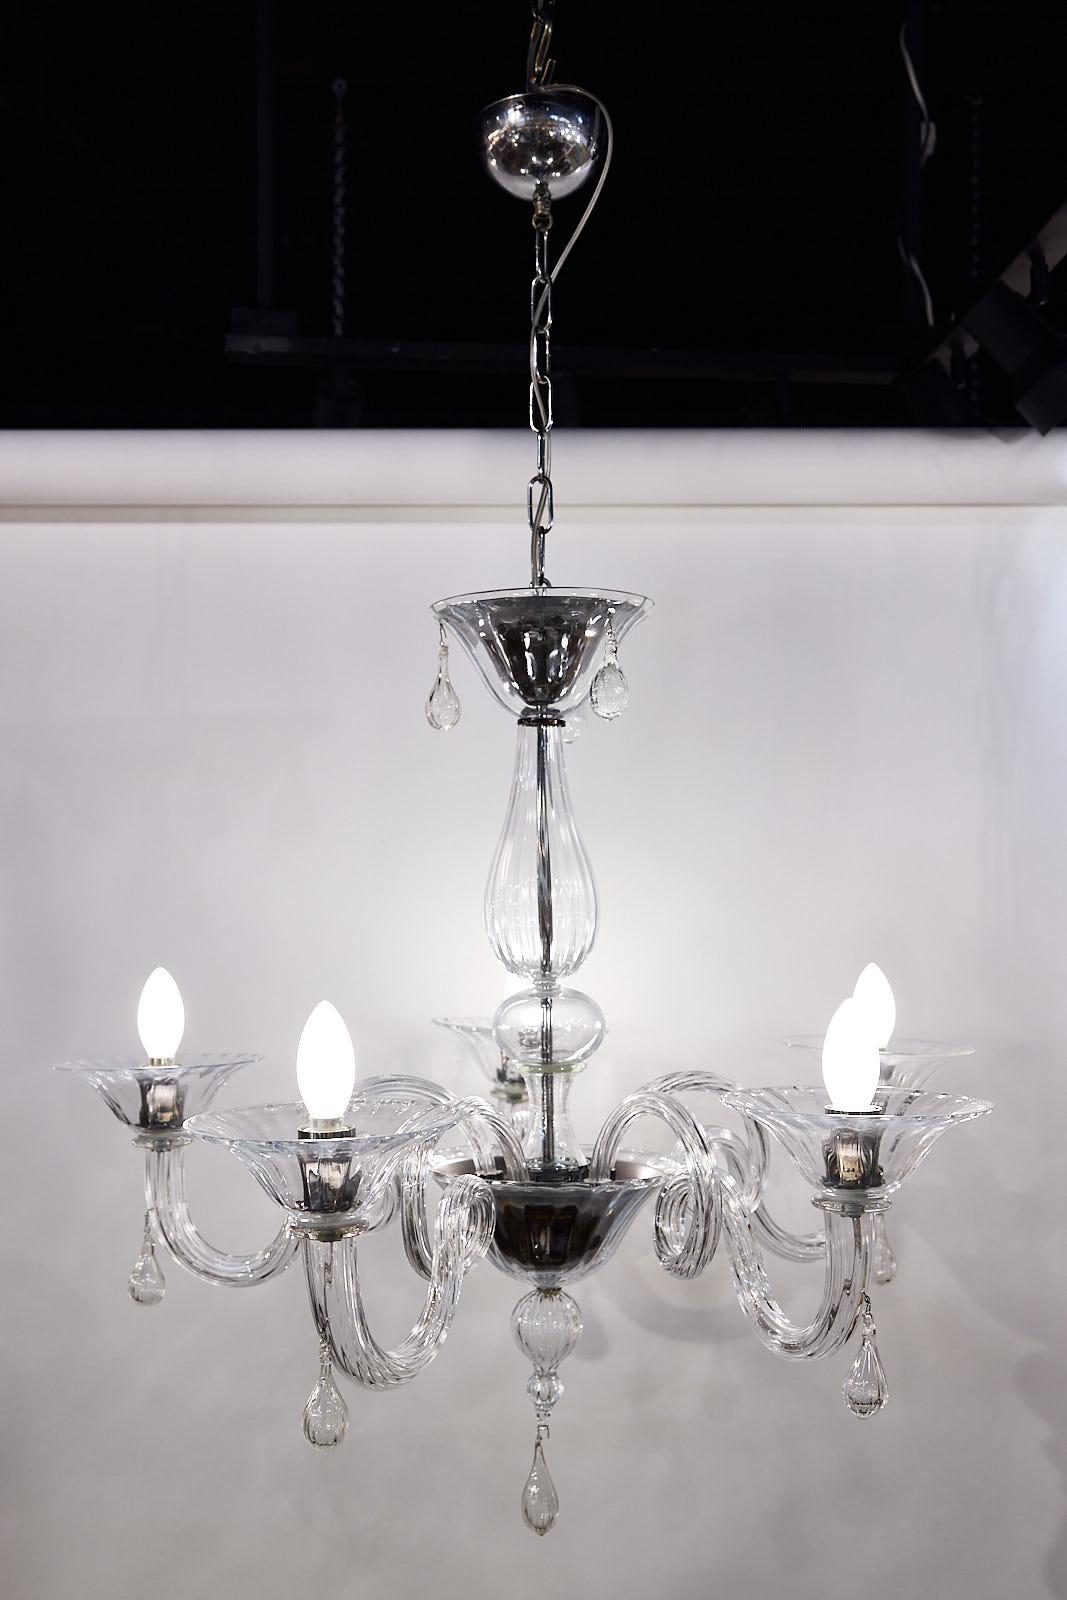 Italian Mid-Century hand-blown Murano glass chandelier having a tiered, central baluster support with five sweeping arms made of twisted, ribbed glass, fluted bobeches, and tear-shaped pedants. The cups and candelabras are chromed adding a layer of